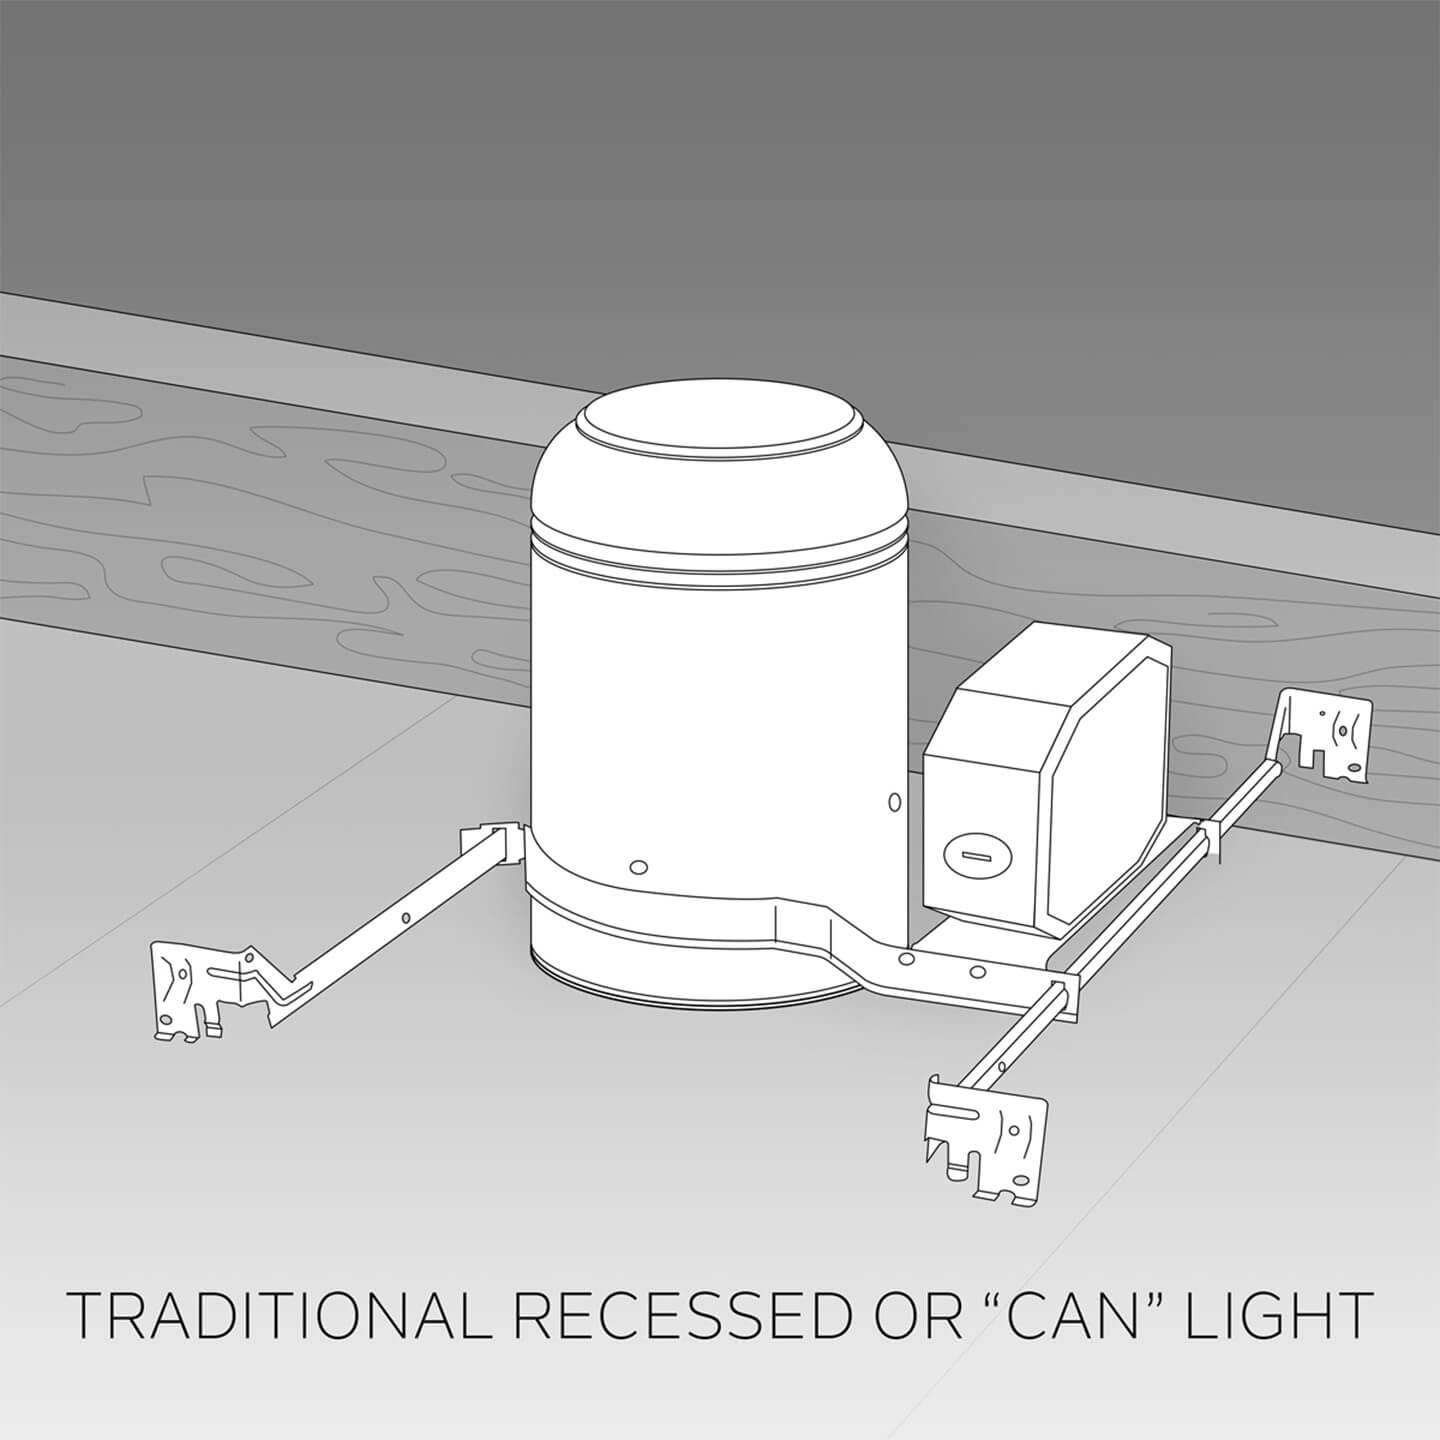 Traditional recessed or "can" light illustration